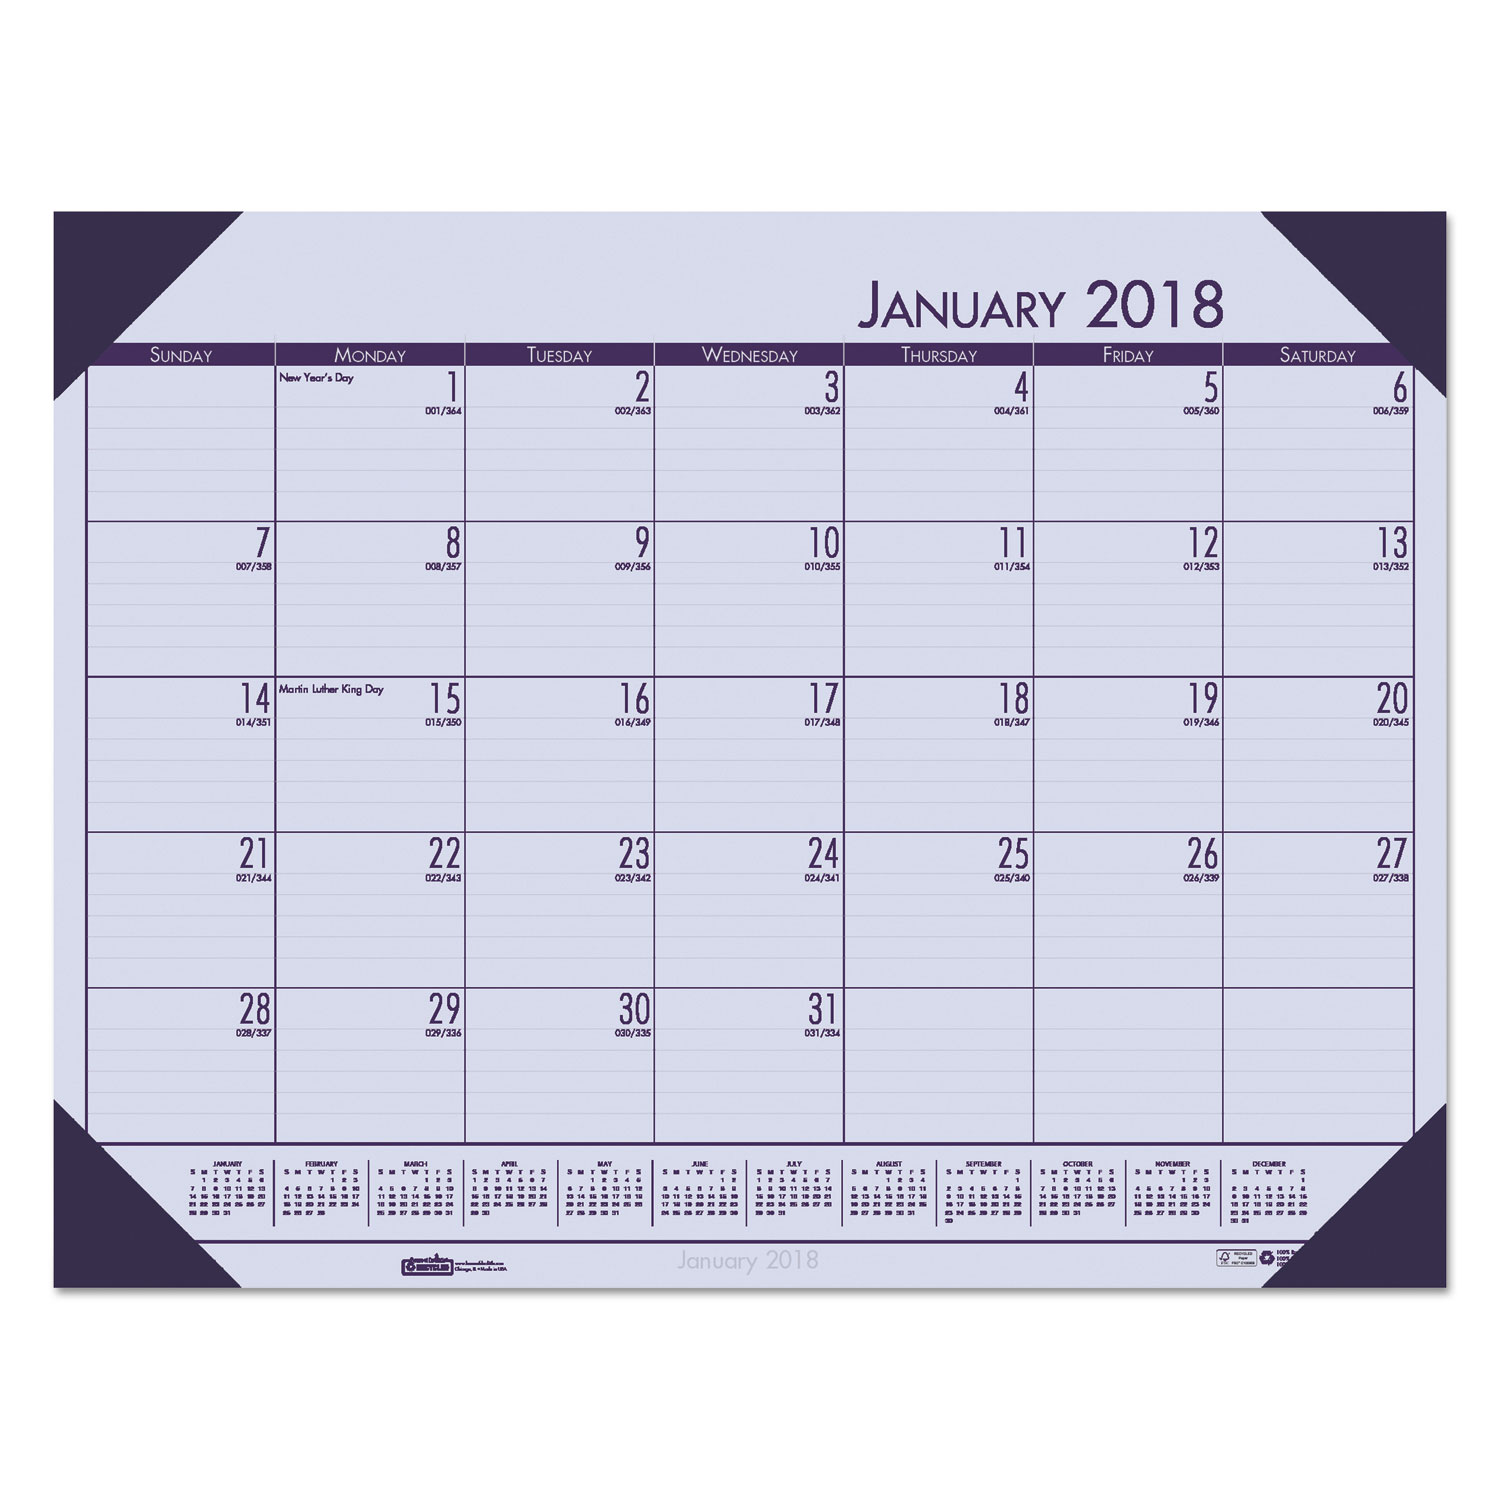 Recycled EcoTones Sunset Orchid Monthly Desk Pad Calendar, 22 x 17, 2018